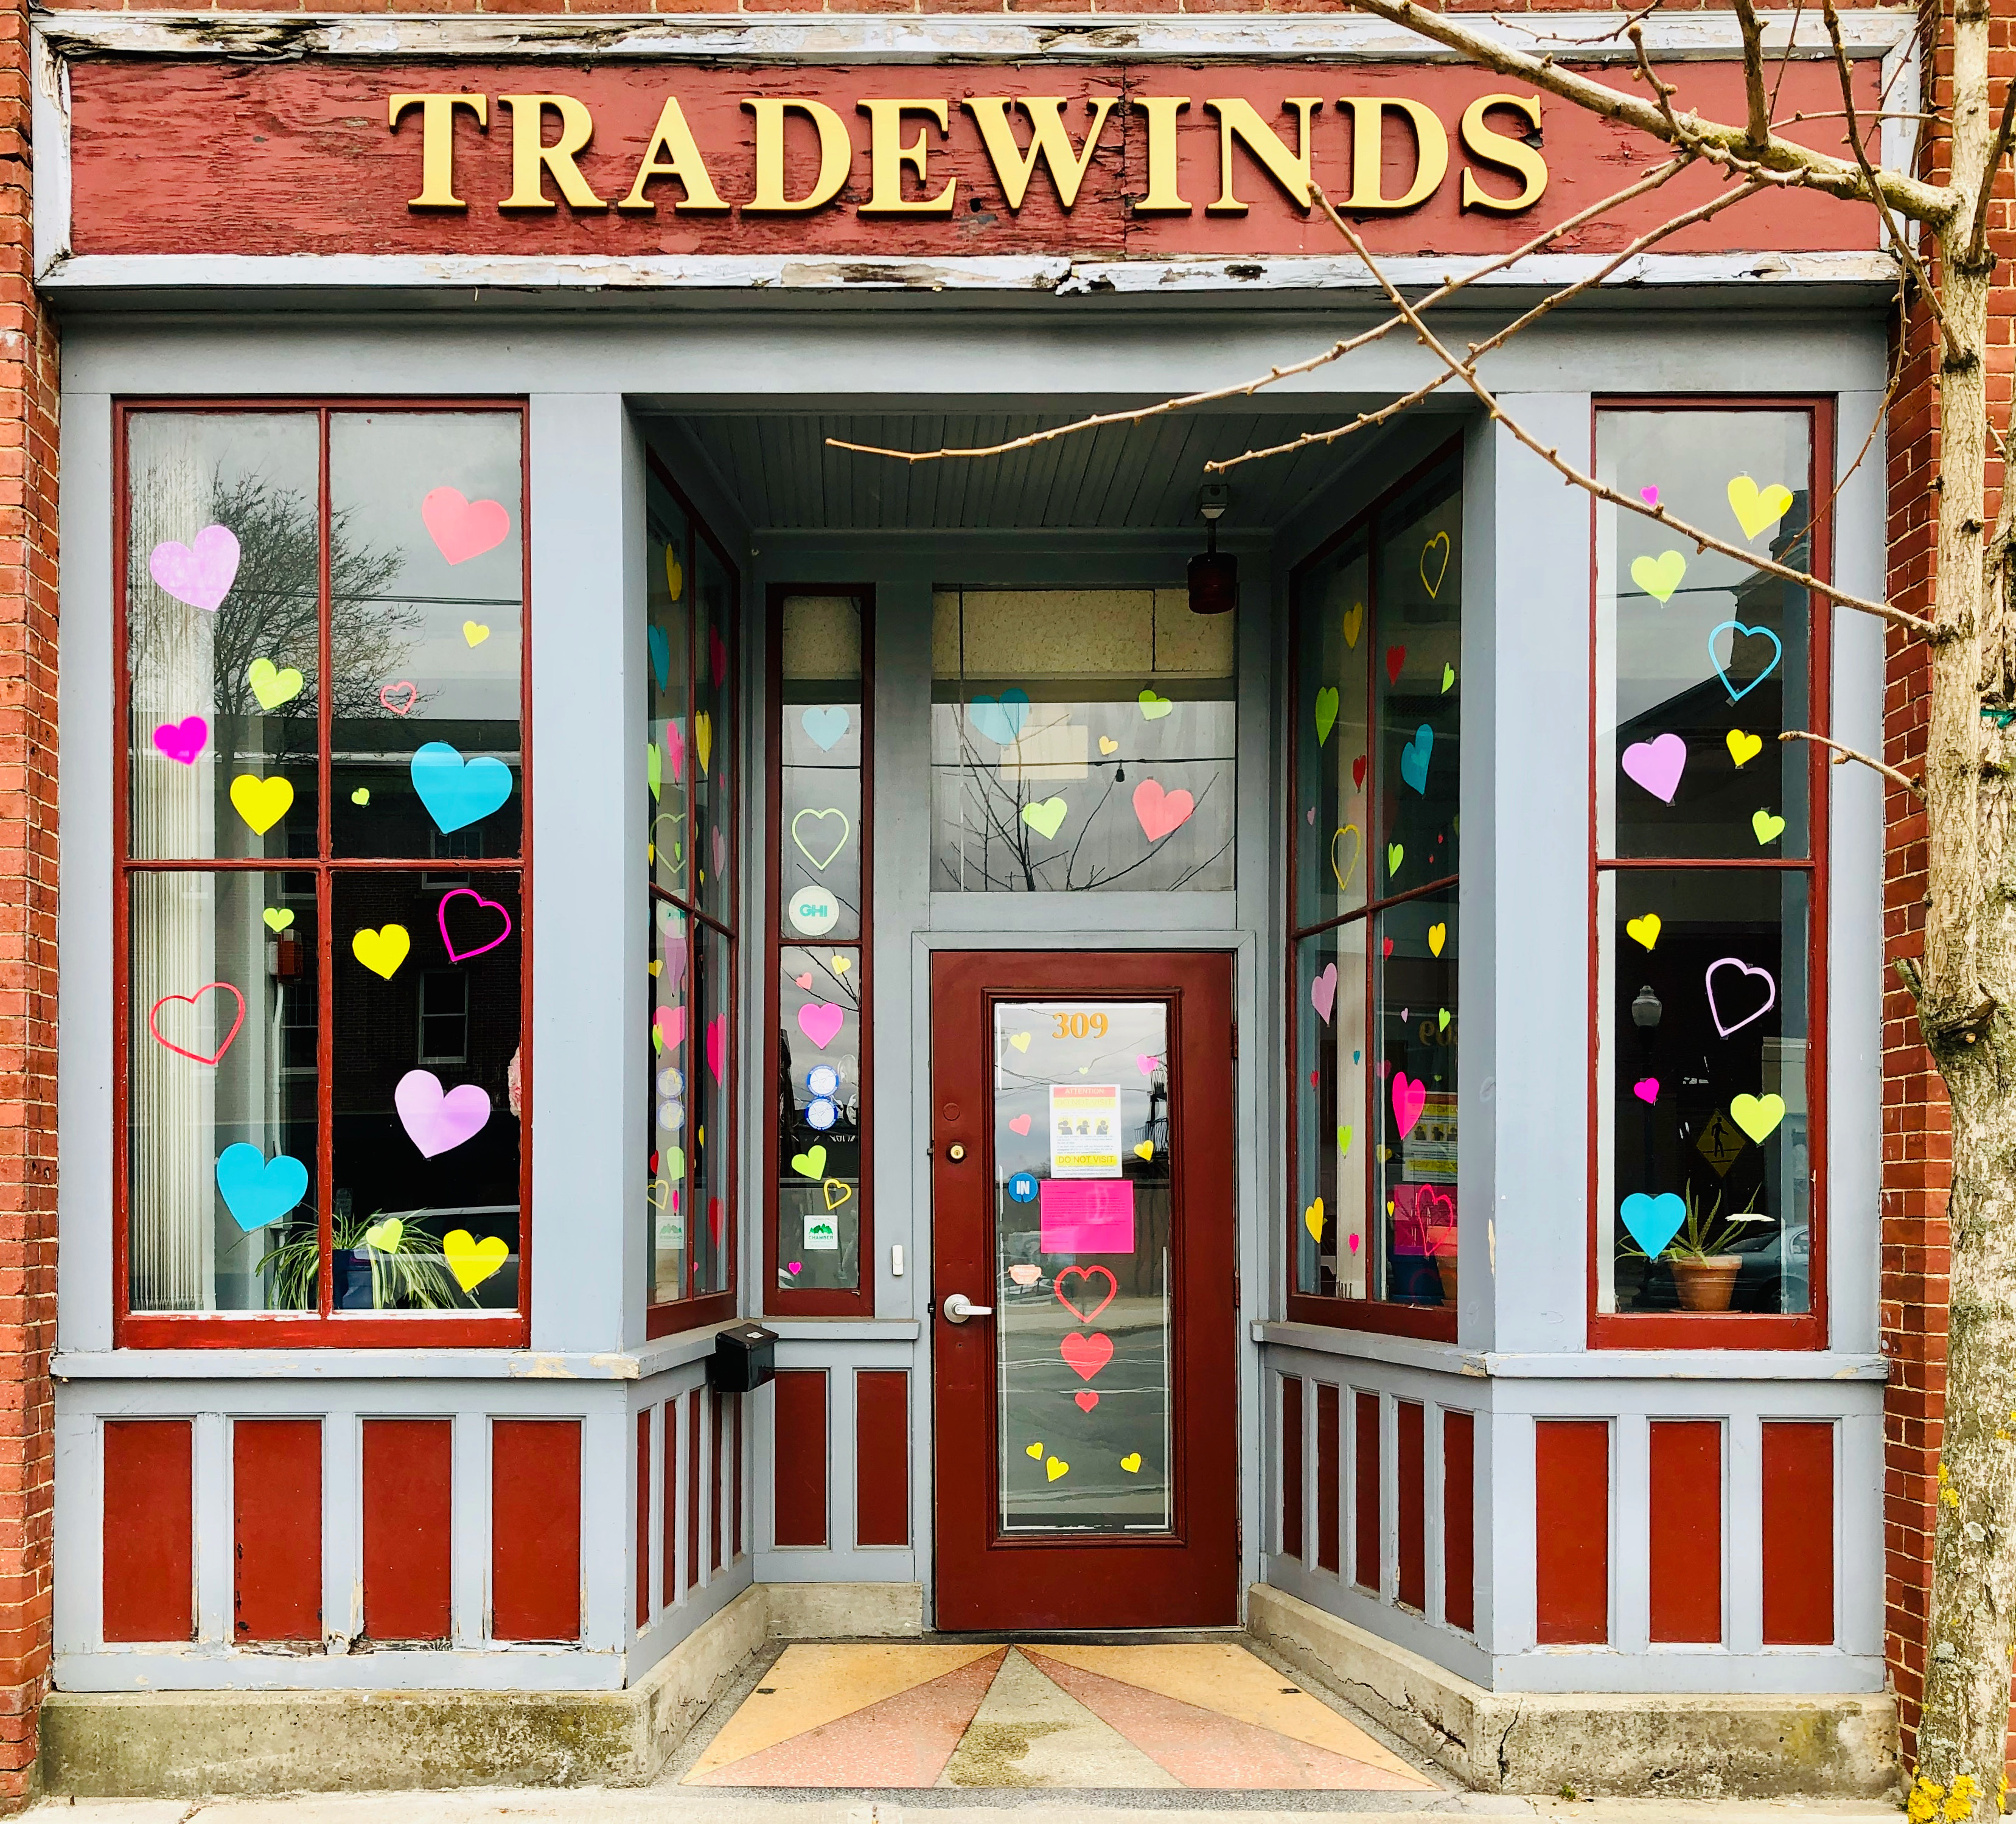 Image of the a red brick building with golden letters on top saying "Tradewinds" in all capital letters. The window panes are decorated with pink, blue, and yellow hearts.